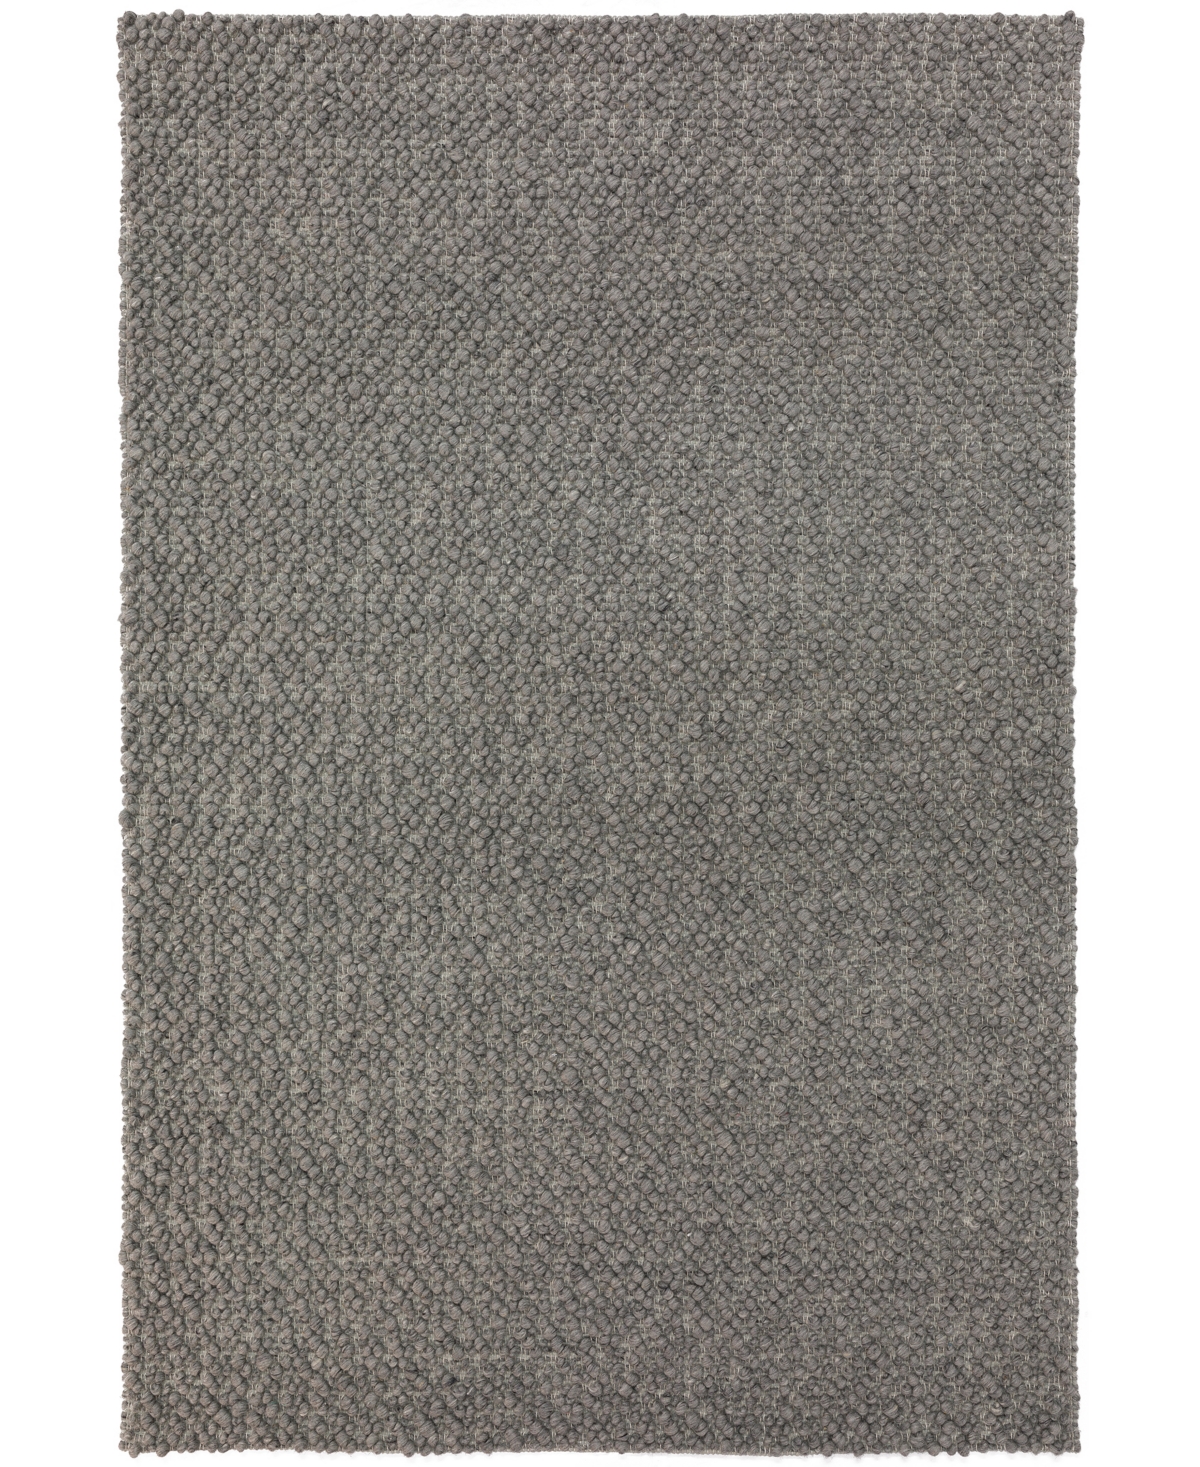 D Style Gorbea Gr1 3'6in x 5'6in Area Rug - Silver-Tone